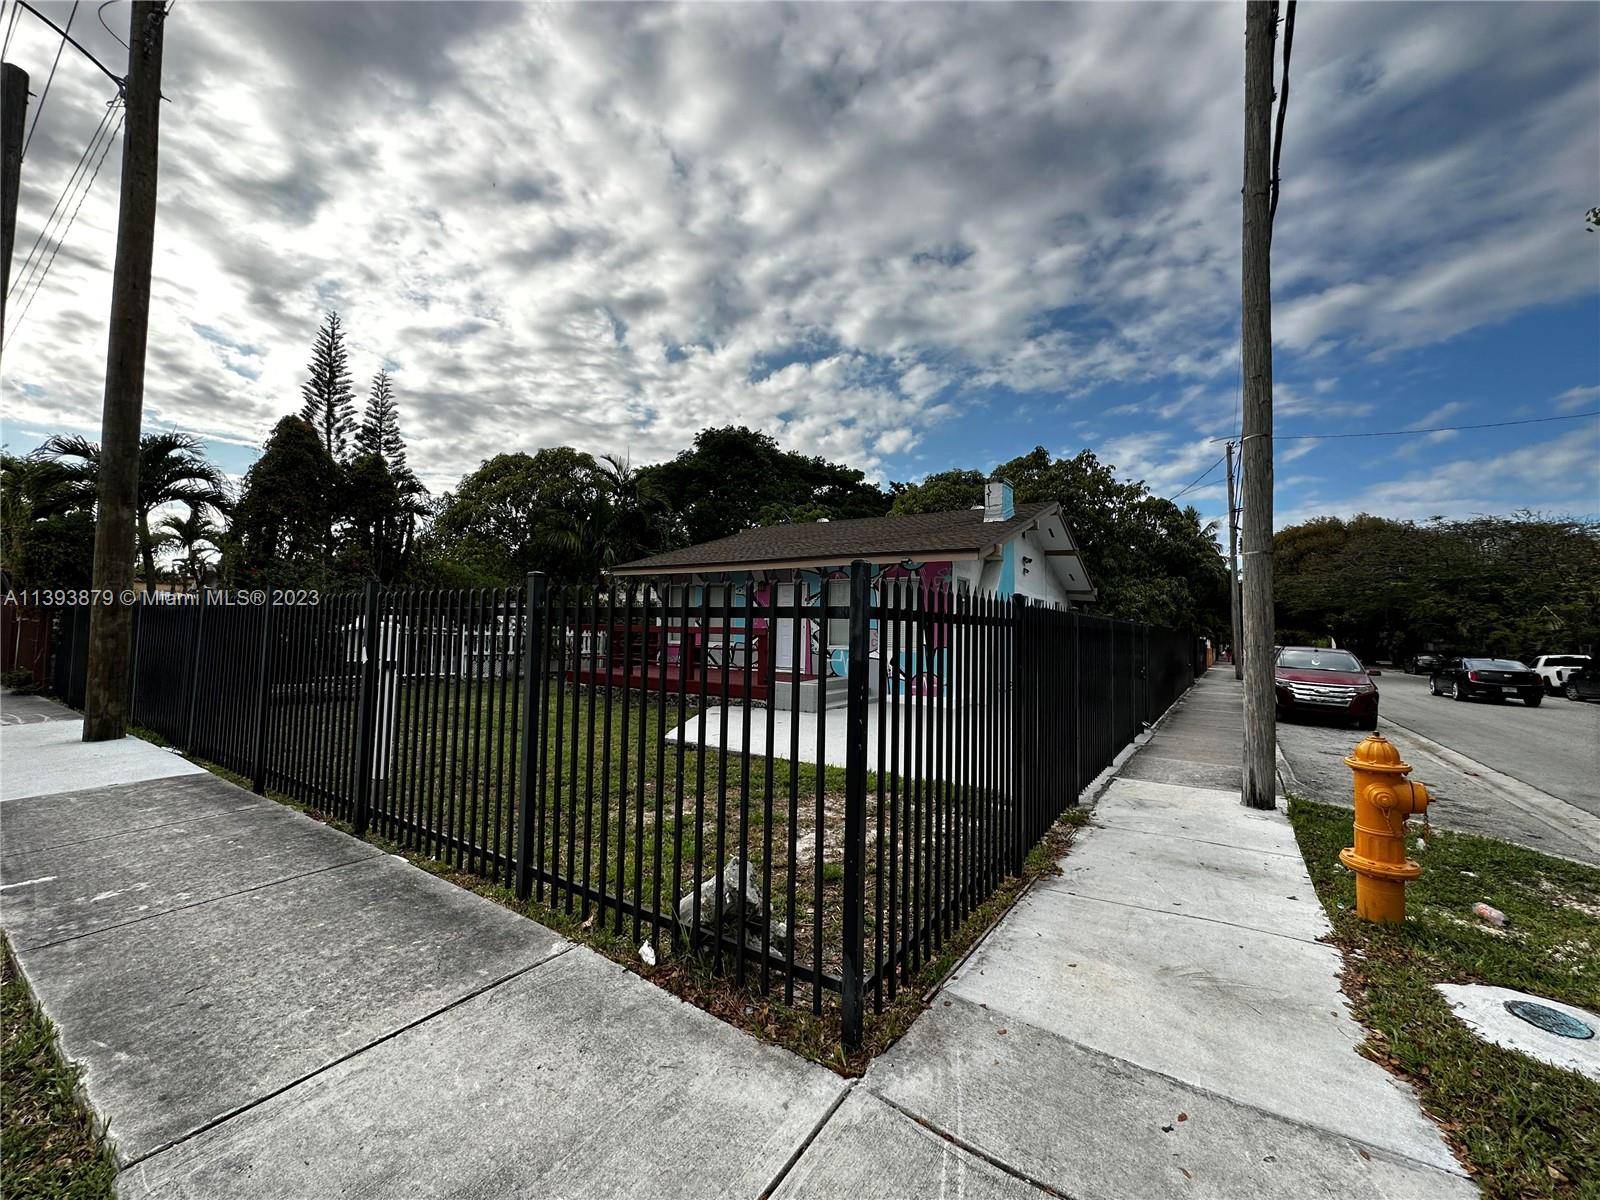 Prime Real Estate Location 7, 800 sqft lot in one of Miami's most up and coming neighborhoods Wynwood Wynwood Norte.